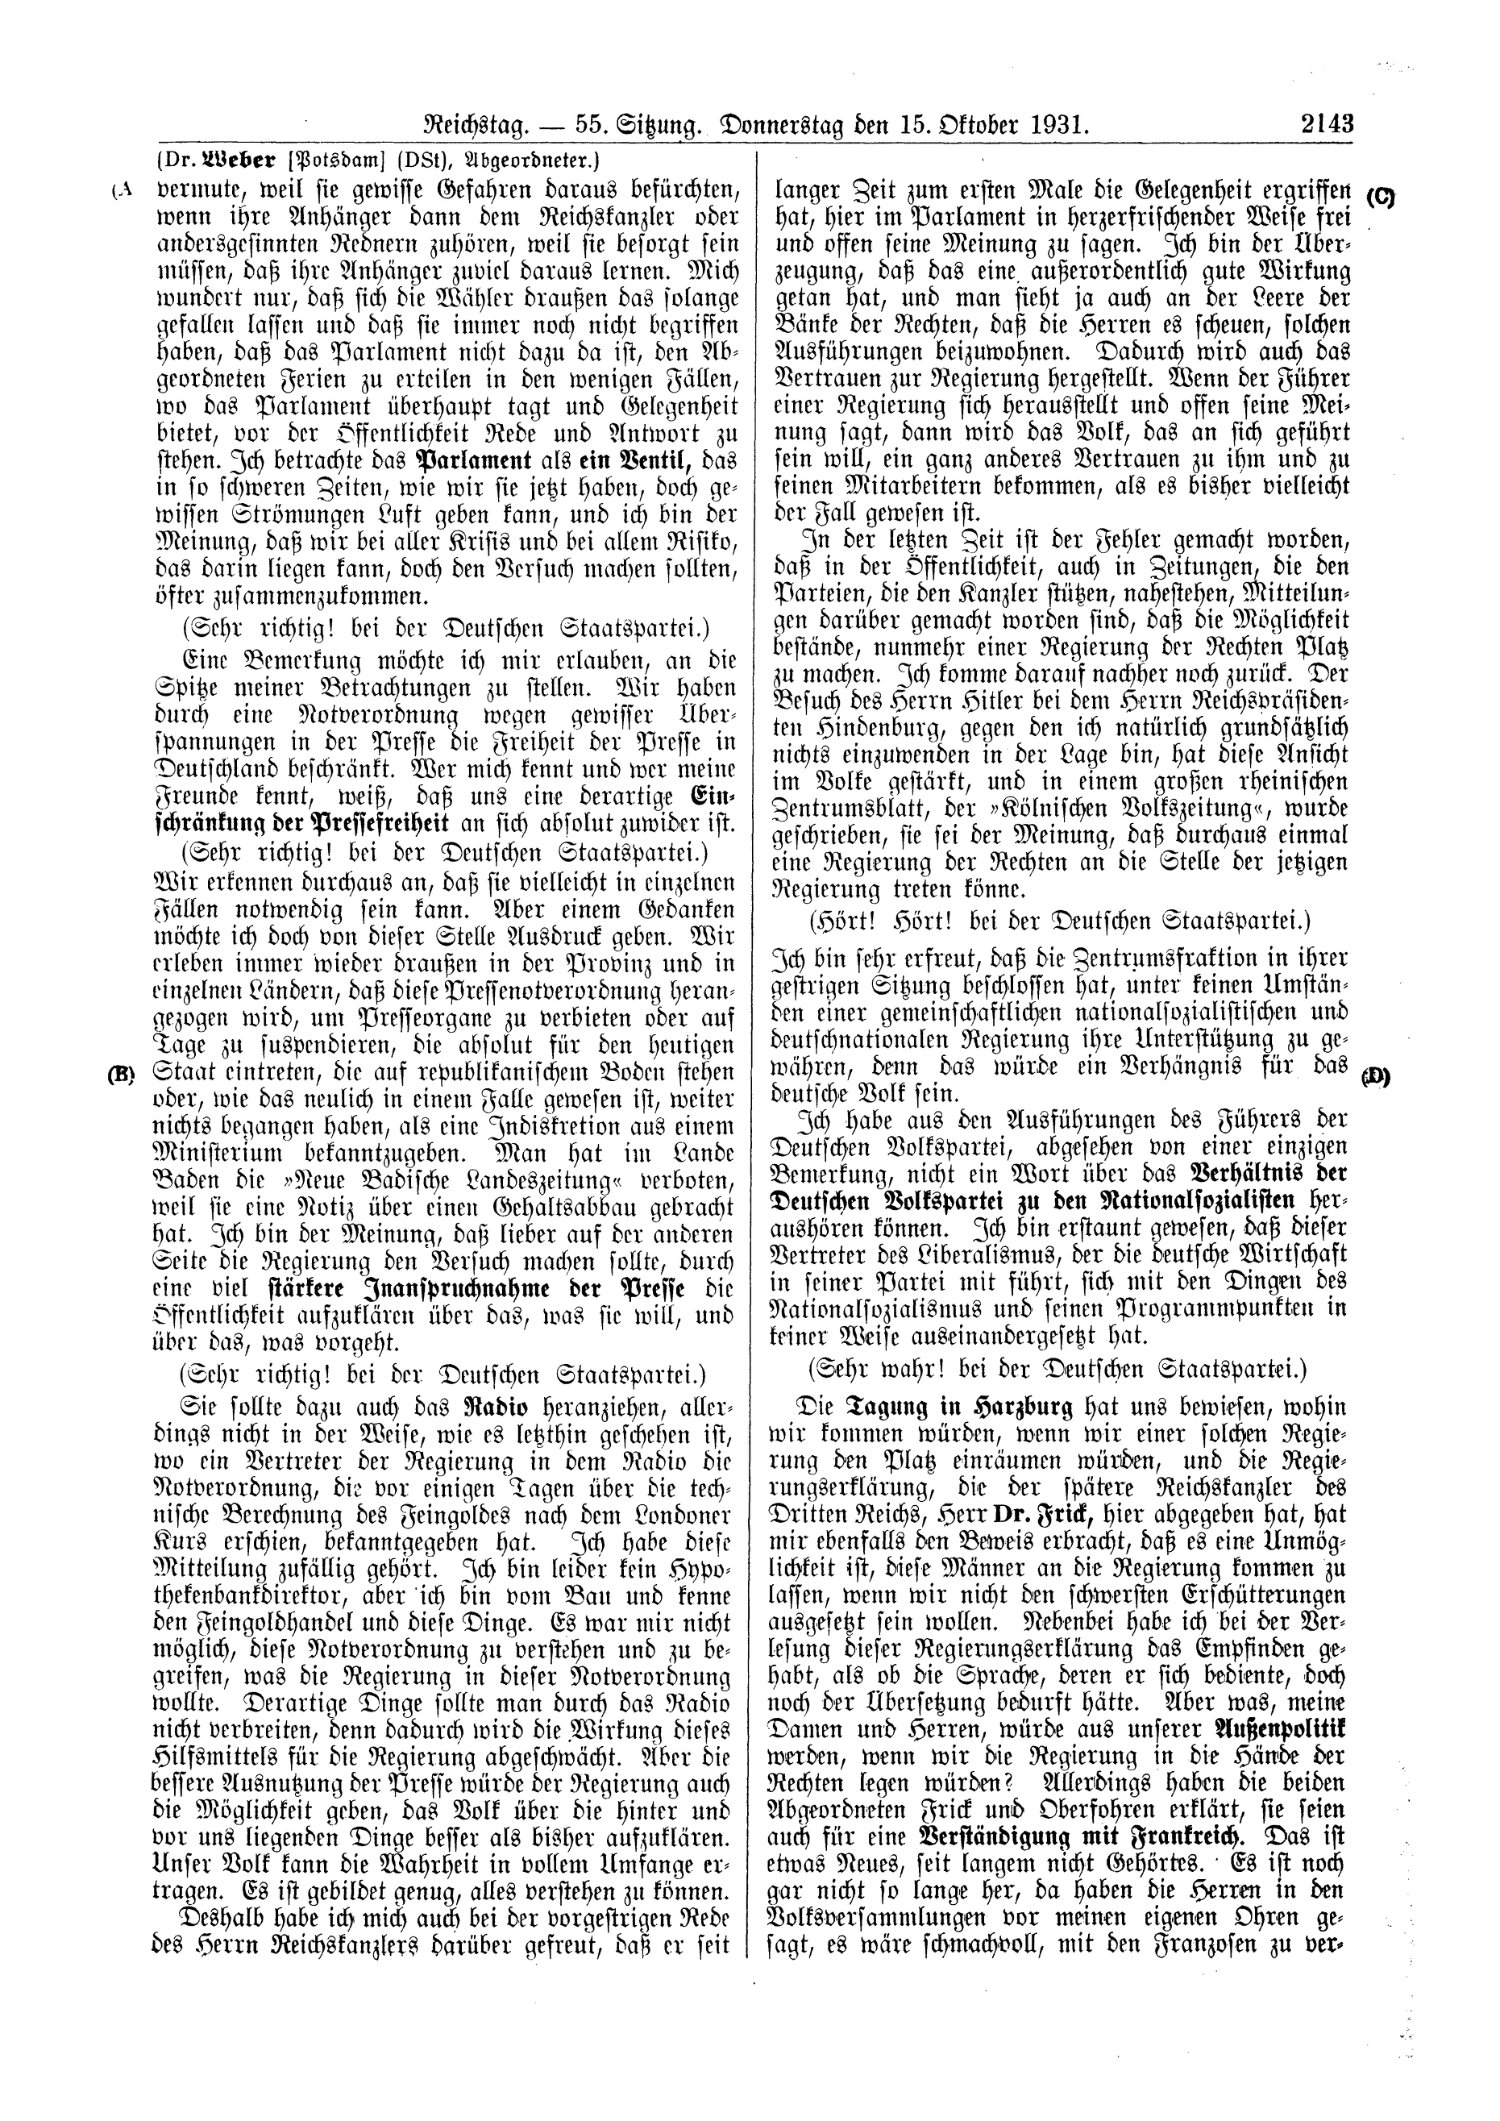 Scan of page 2143